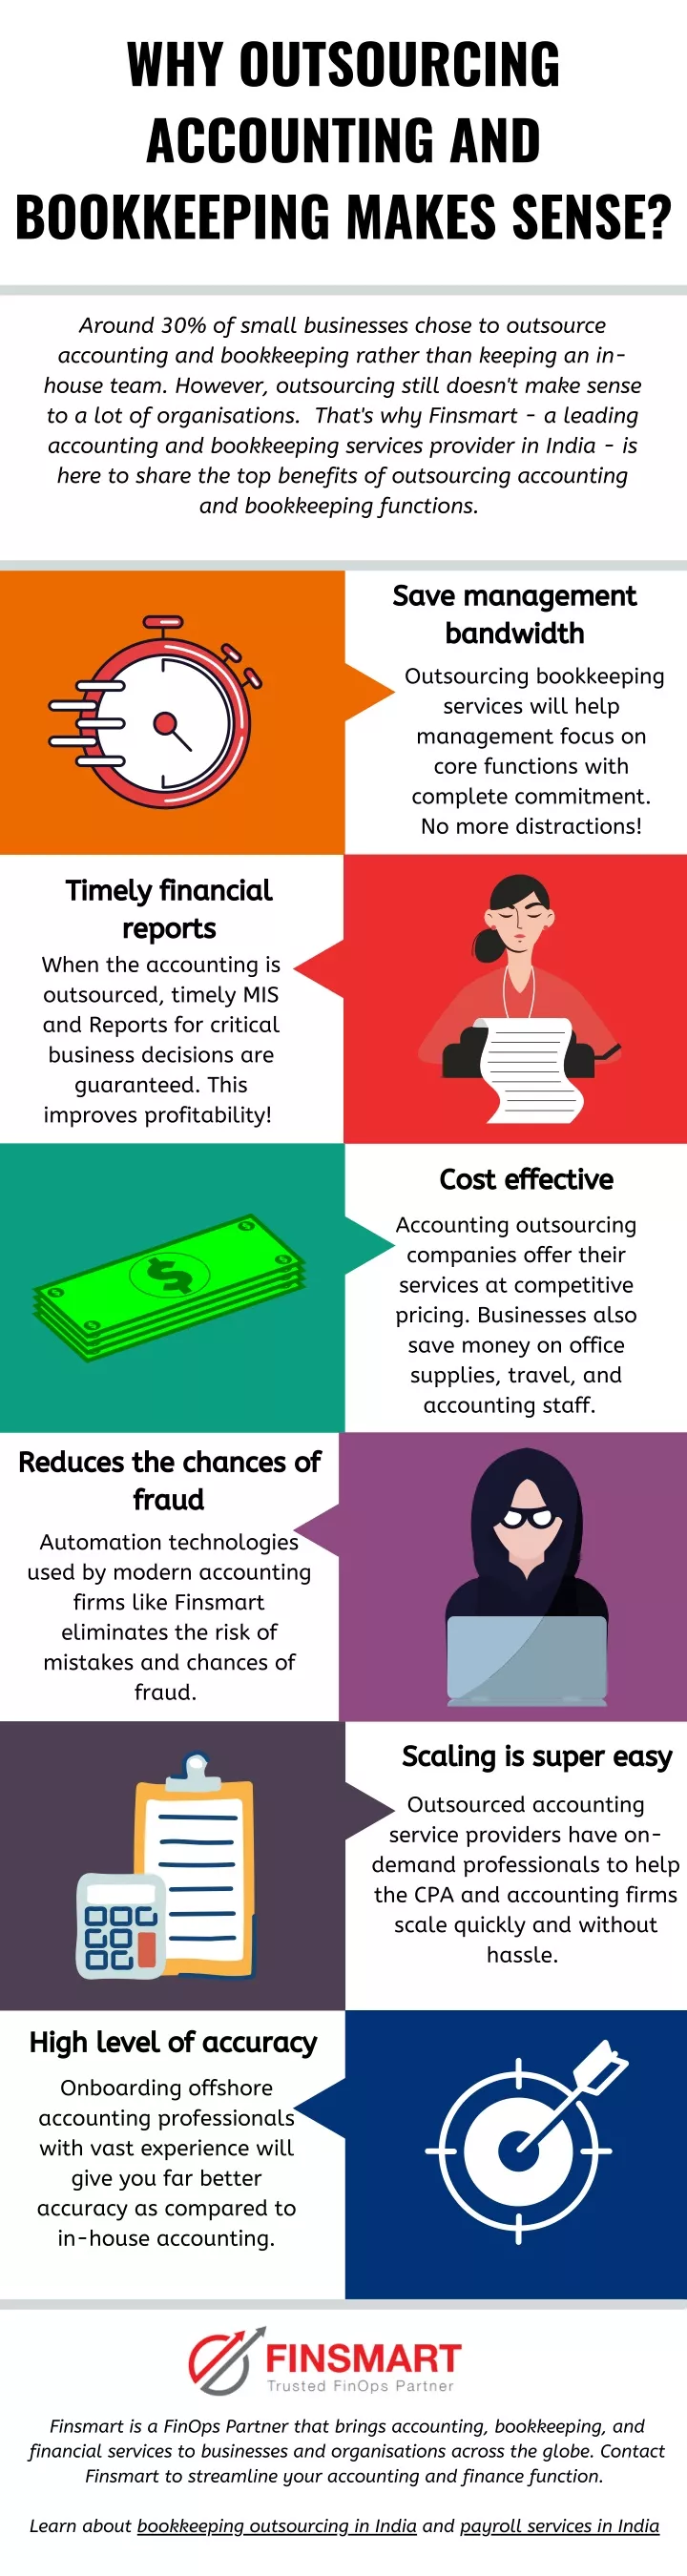 why outsourcing accounting and bookkeeping makes